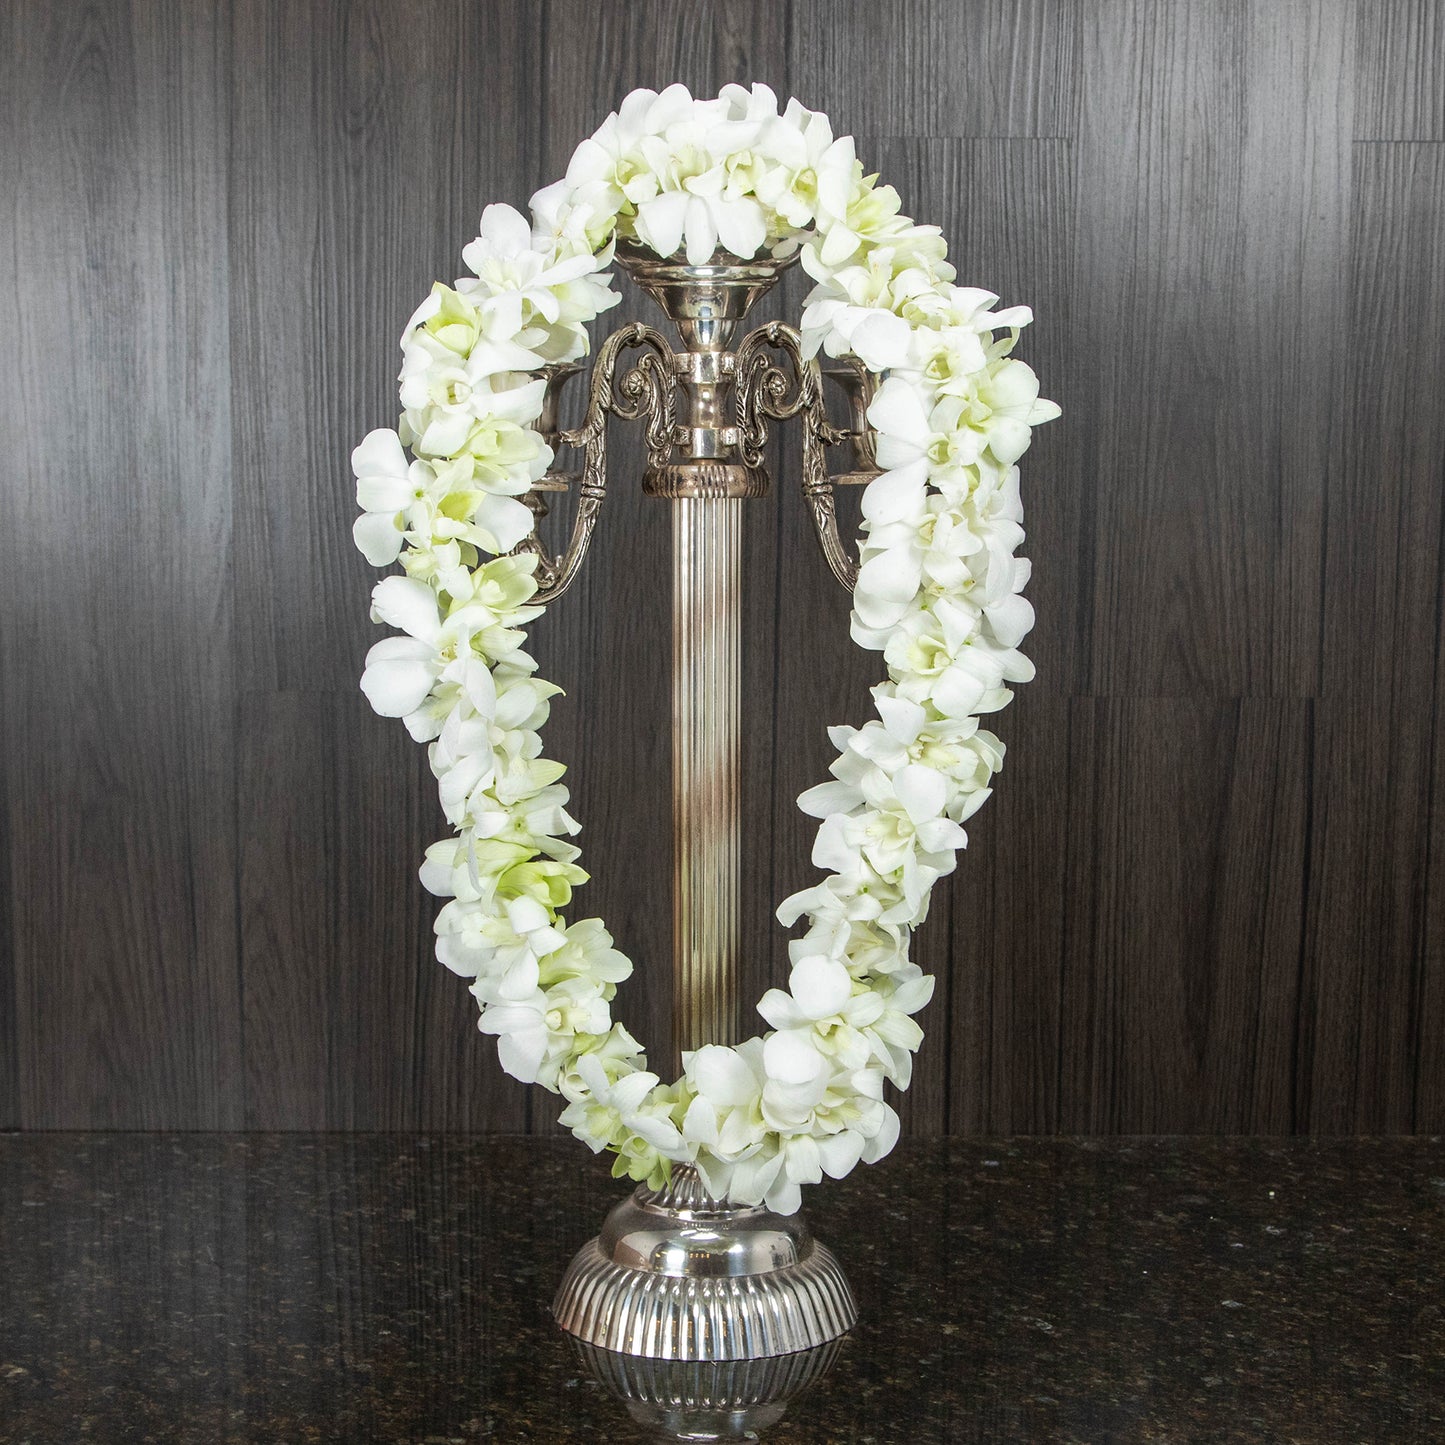 a double orchid lei made out of white dendrobium orchids hanging across a candelabra